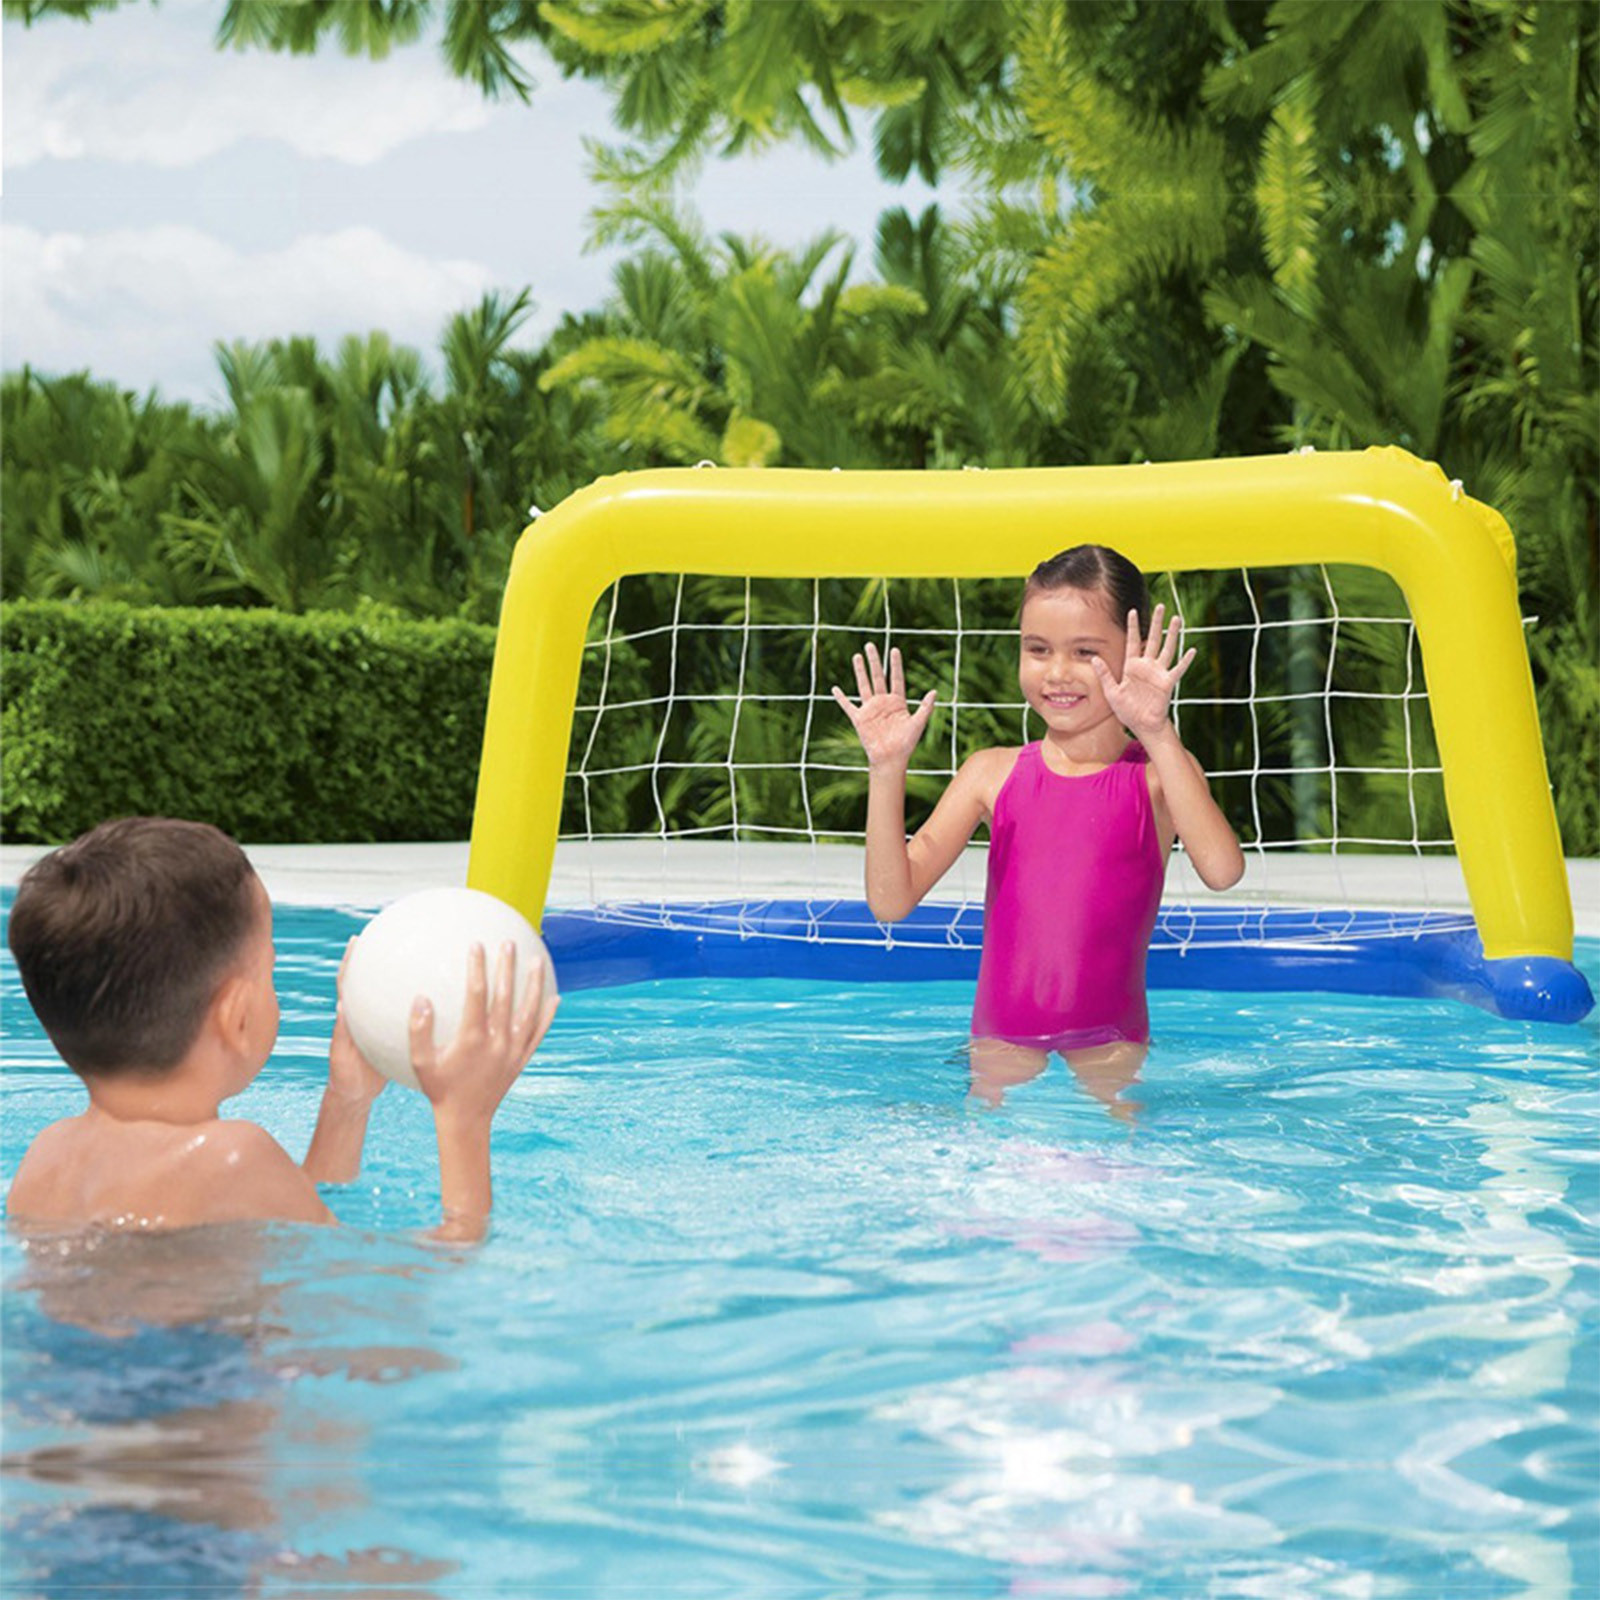 Fridja Pool Floats Toys Games Set - Floating Basketball Hoop Inflatable  Cross Ring Toss Pool Game Toys for Kids Adults Swimming Pool Water Game 